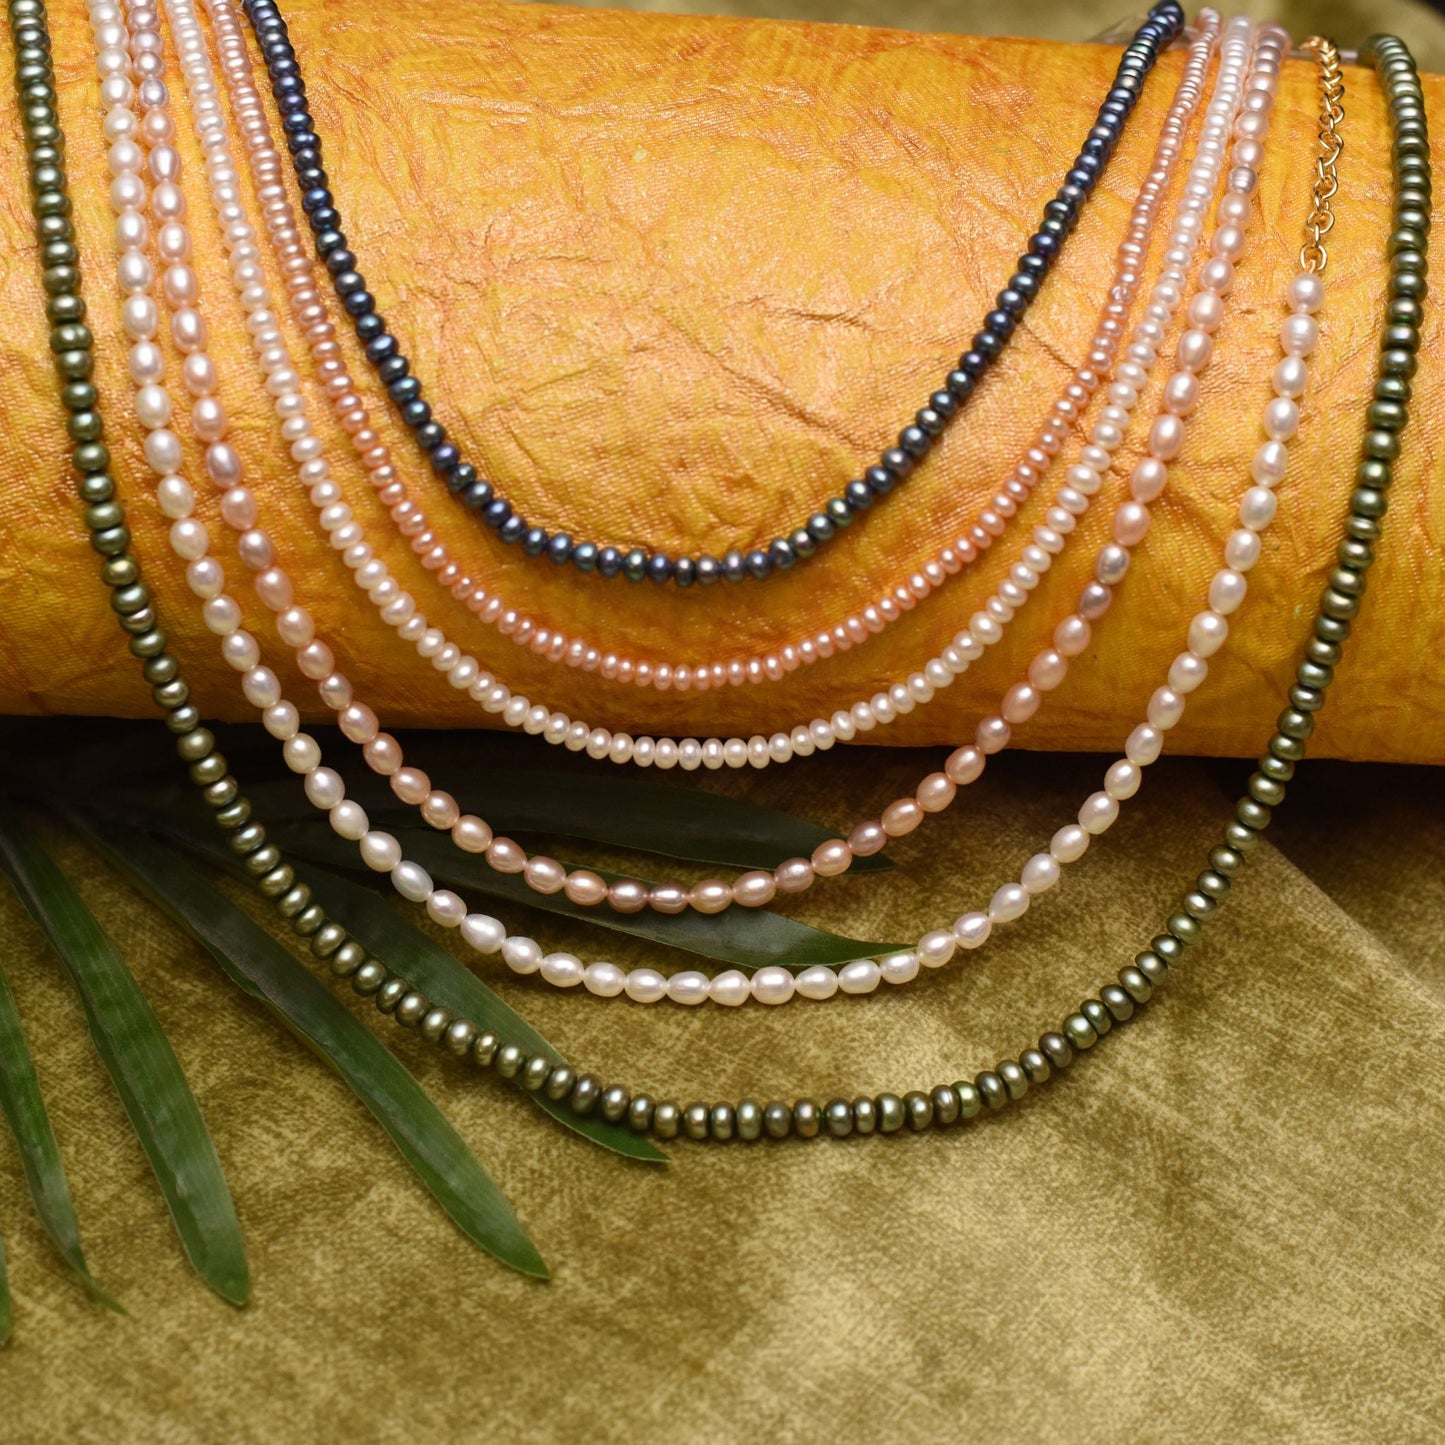 Six Seasons - Multilayered Multicolored Pearl Necklace